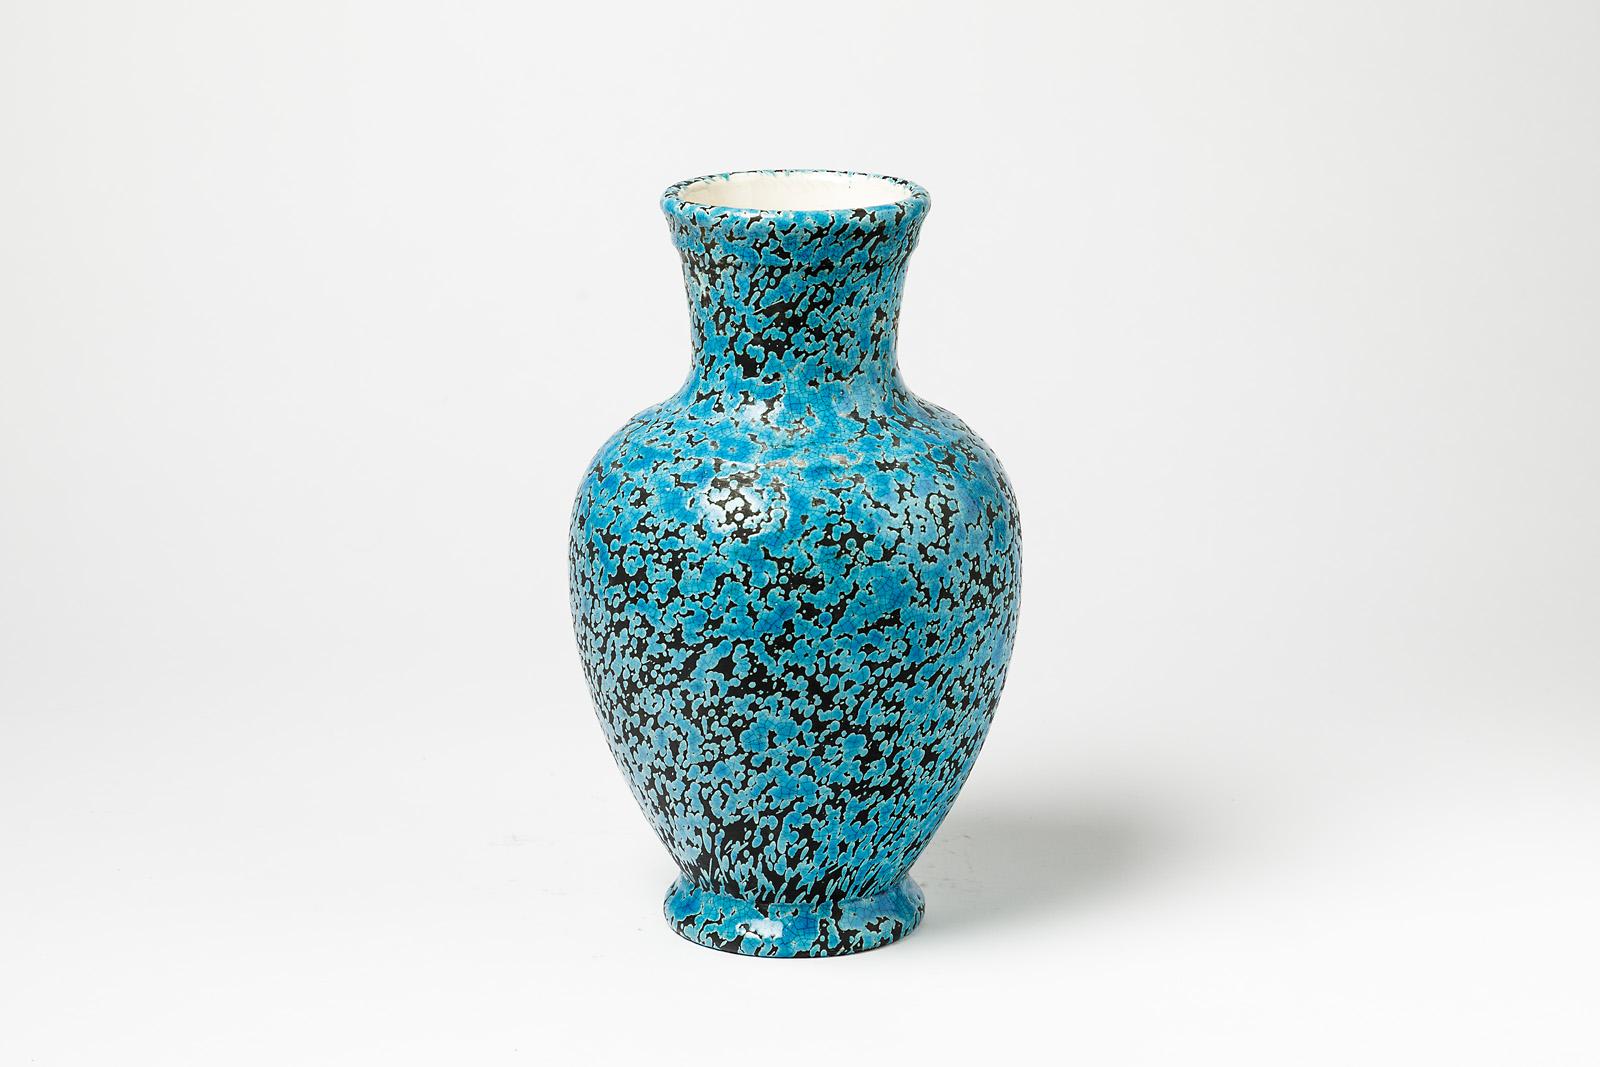 Decorative midcentury ceramic vase.

Classical form with very modern and decorative blue ceramic glaze.

Signed and dated under the base.

Date: 1965
Artist: Sipar

Dimensions: 30 x 17 x 17cm

Excellent original condition.